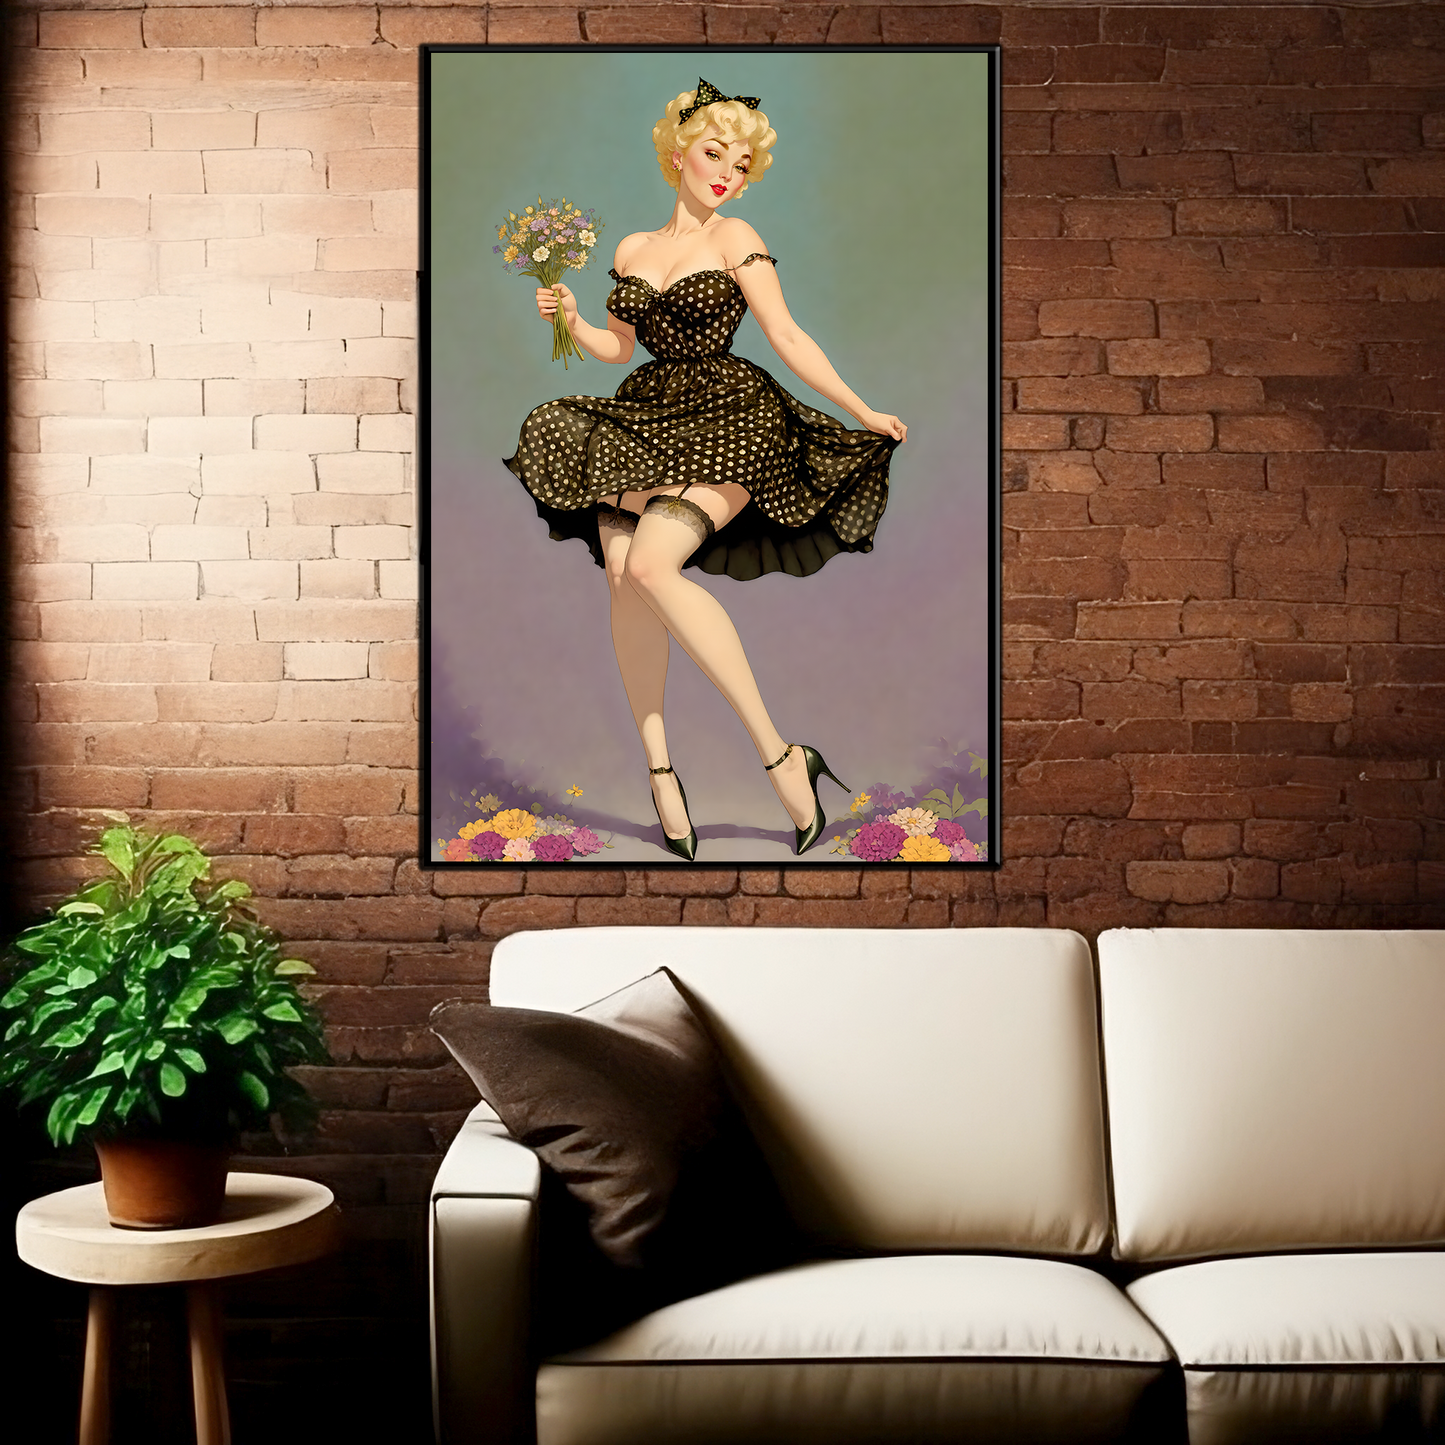 Daily Pinup #74 - Delighted Wall Art